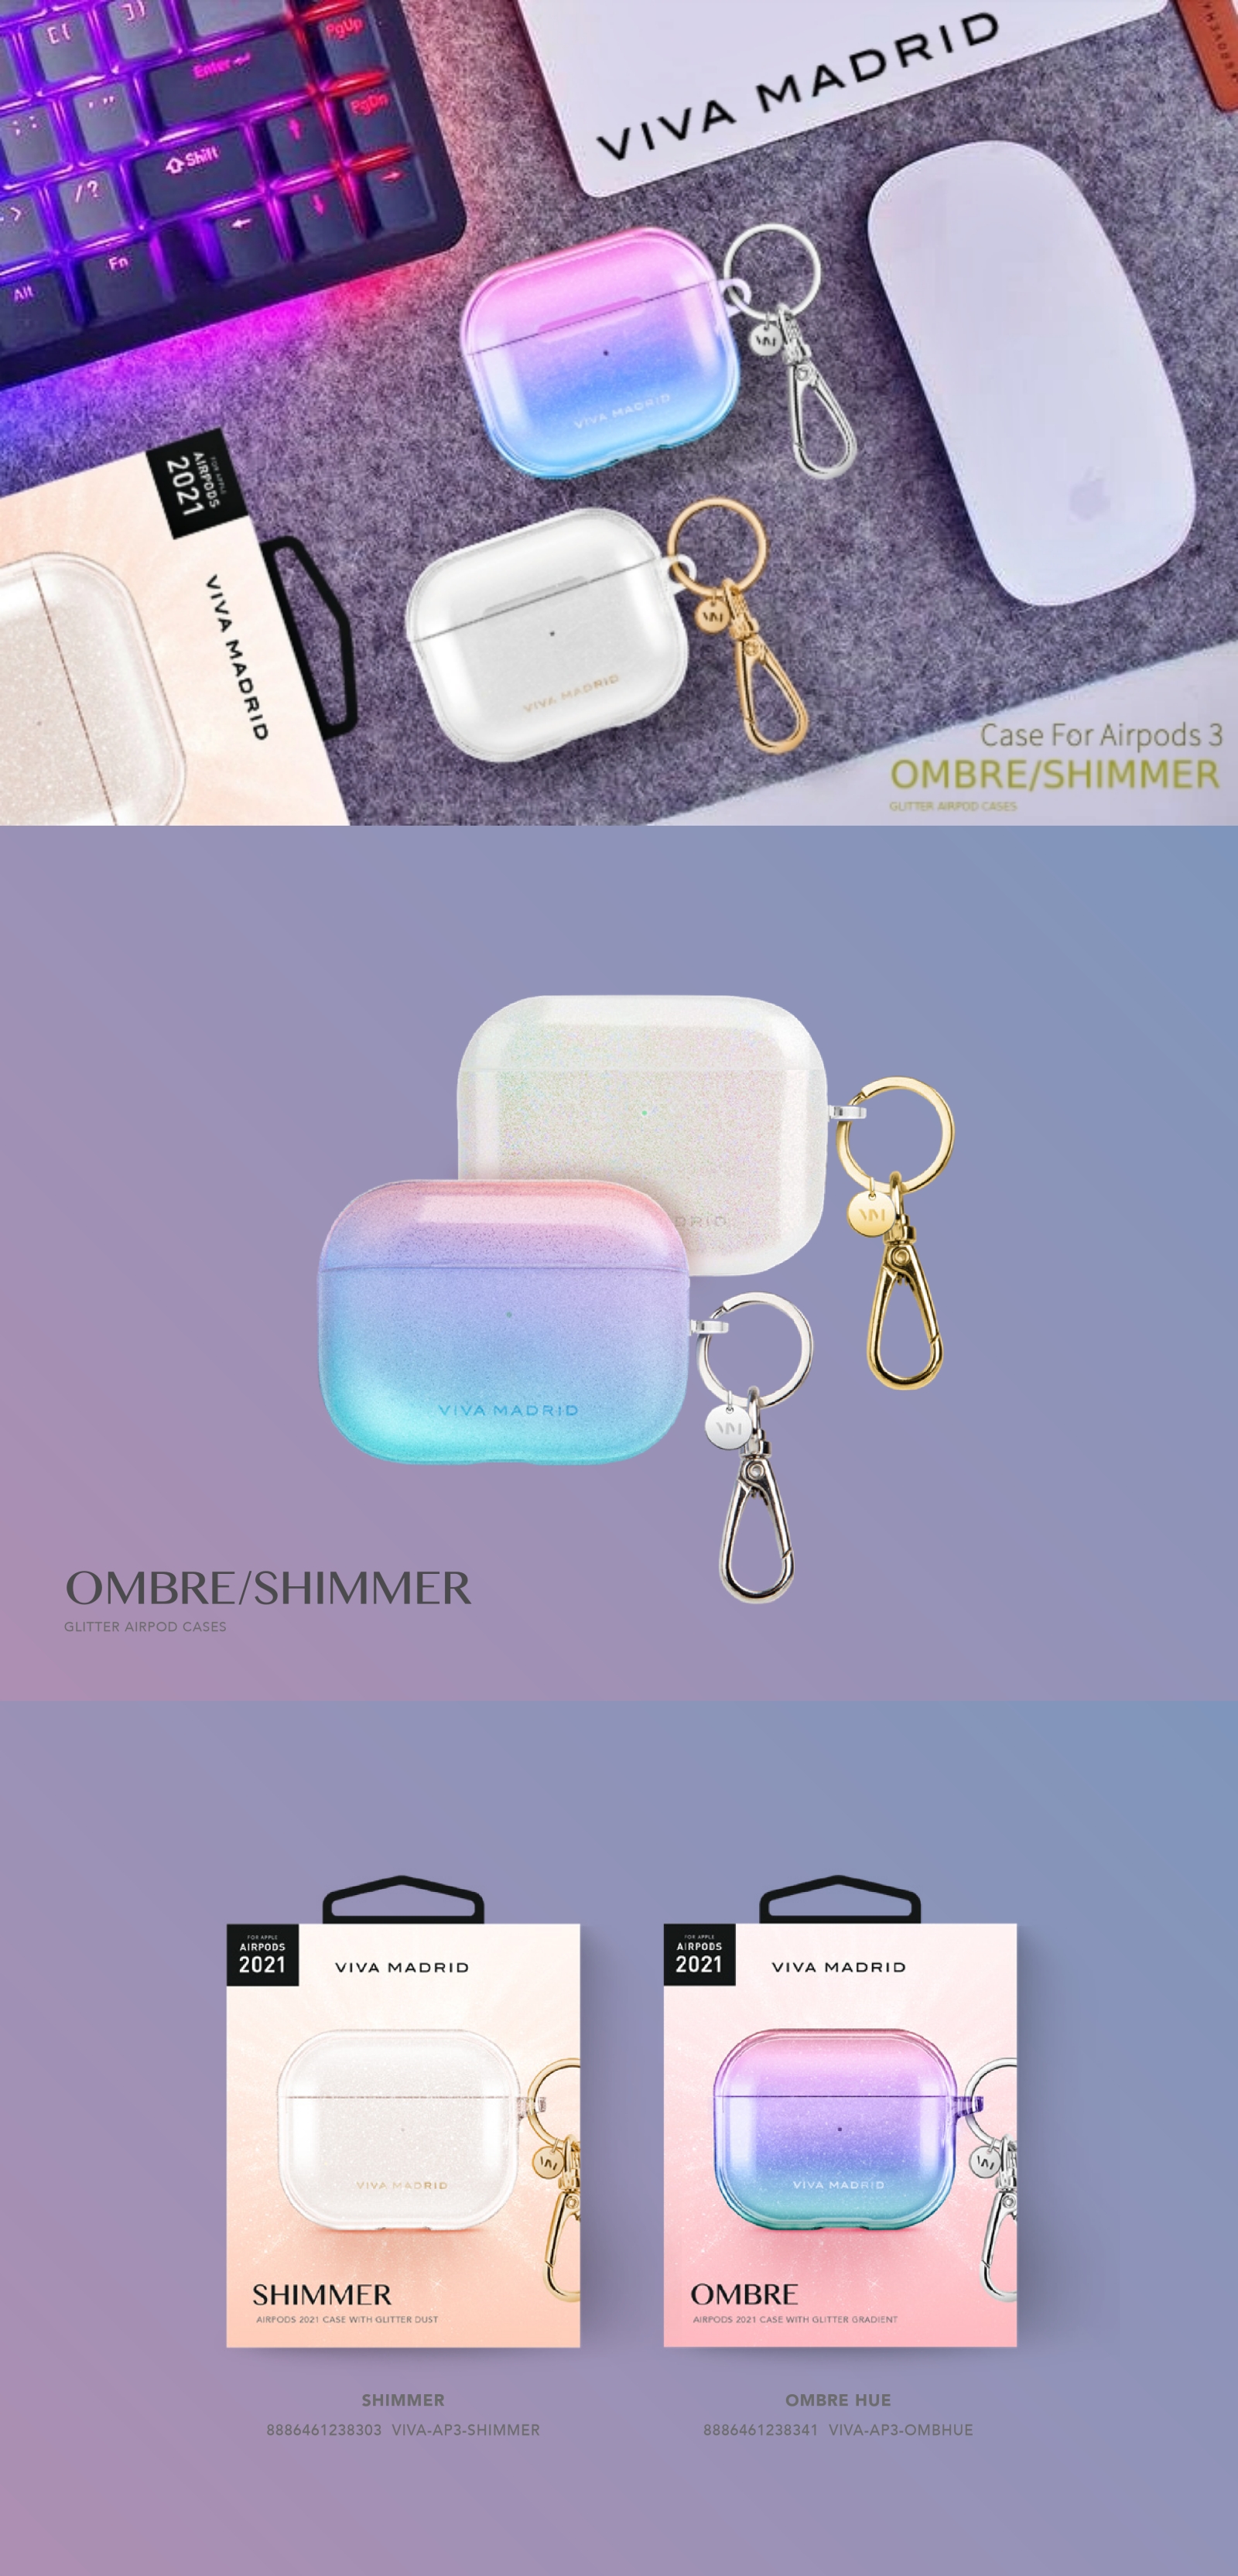 Other Materials Headphones & Earbuds Storage - Viva Madrid Ombre AirPods 3 Case